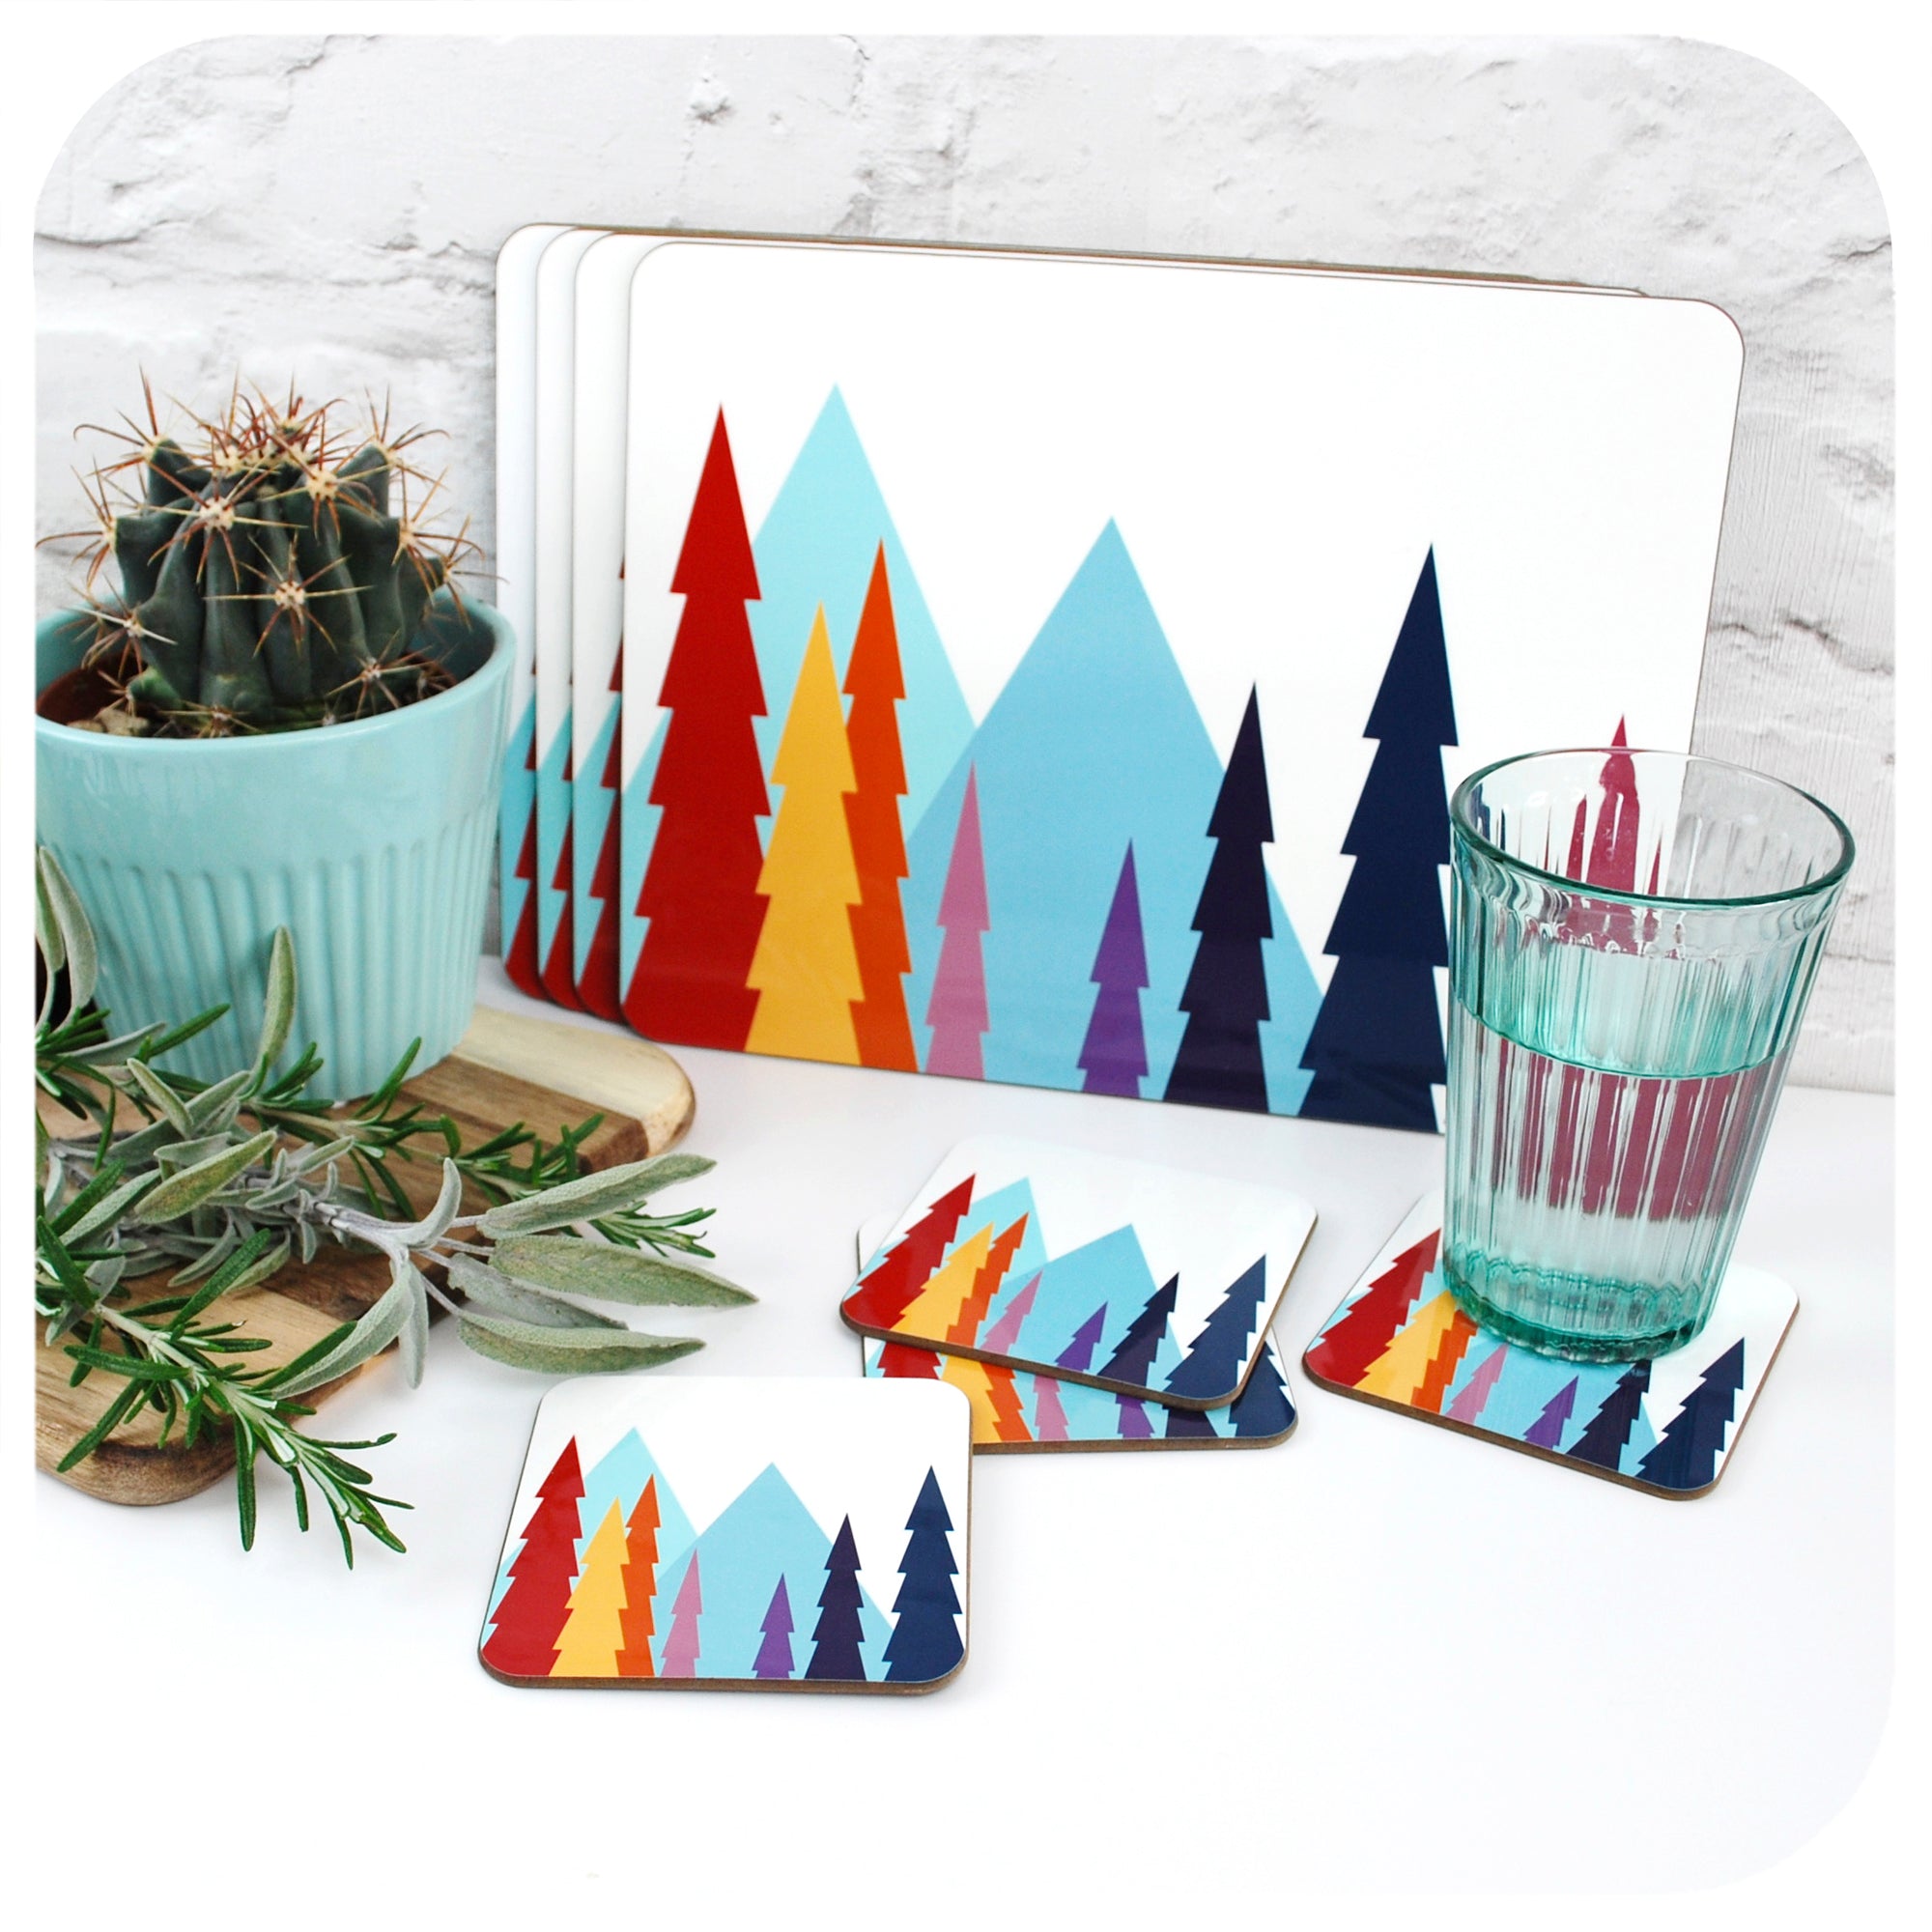 Nordic Trees Placemats and Coasters with cactus, herbs and glass of water | The Inkabilly Emporium